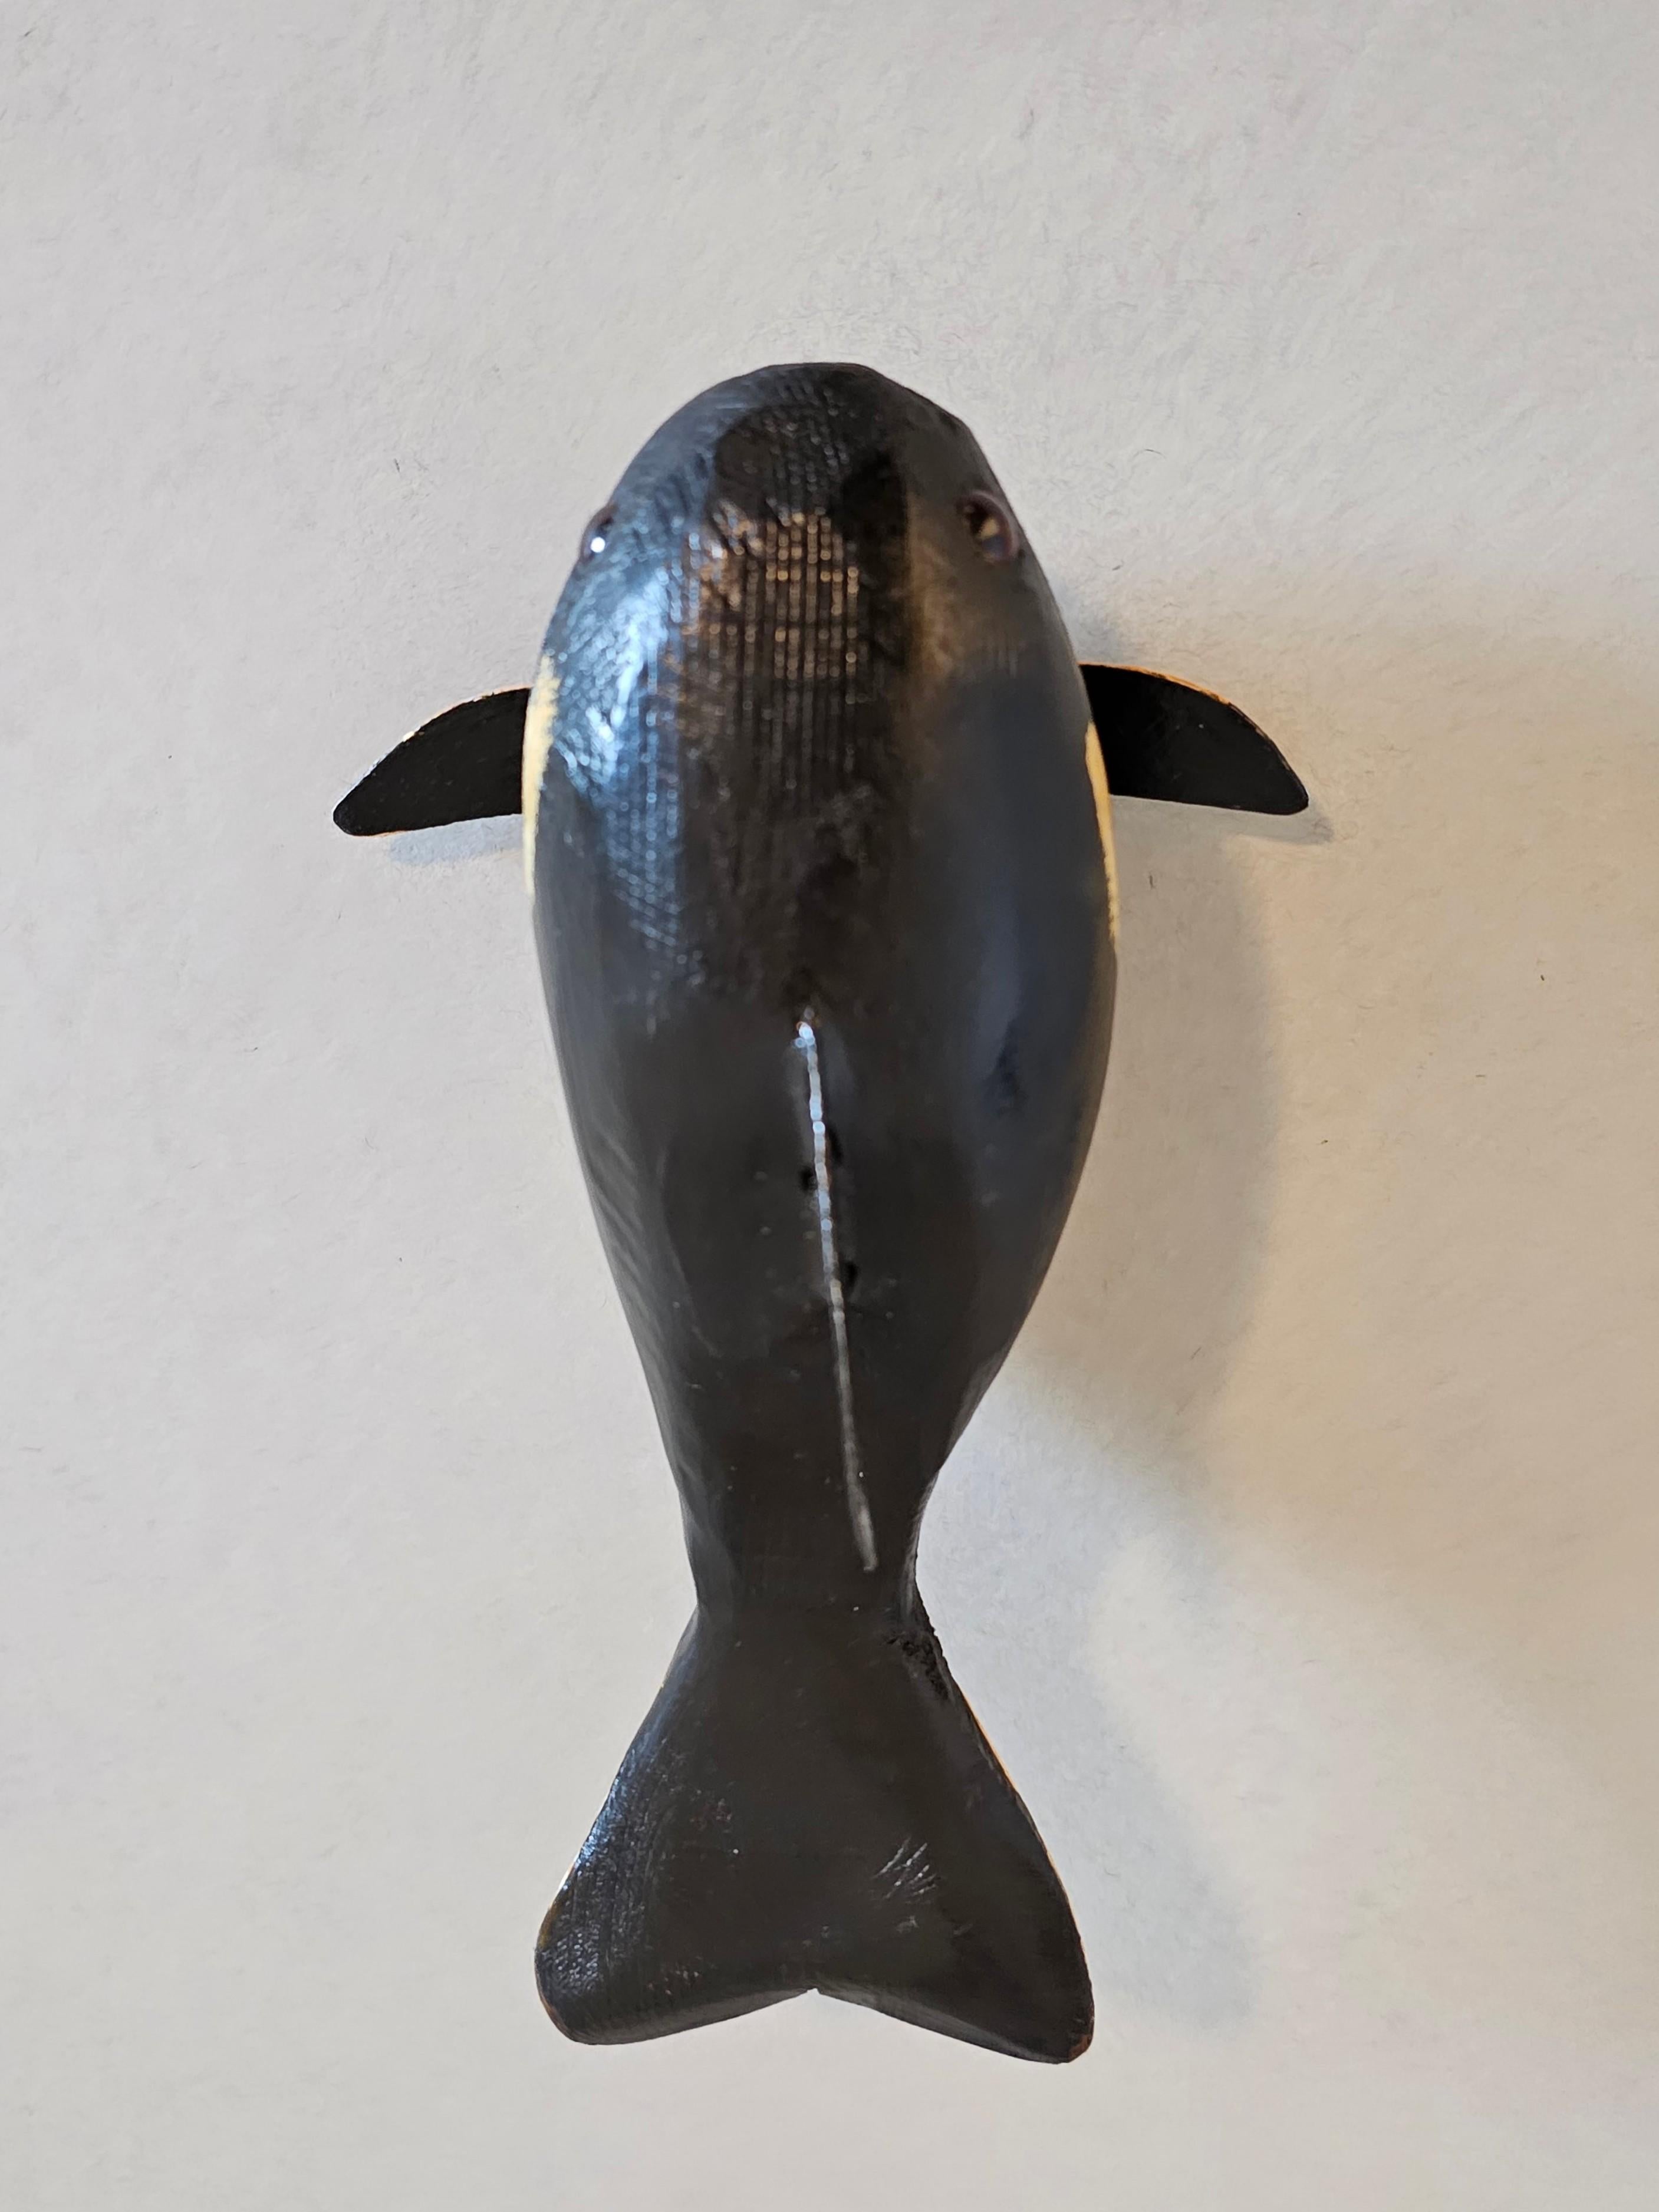 Duluth Fish Decoy American Folk Art Carved Painted Orca Killer Whale Sculpture For Sale 2